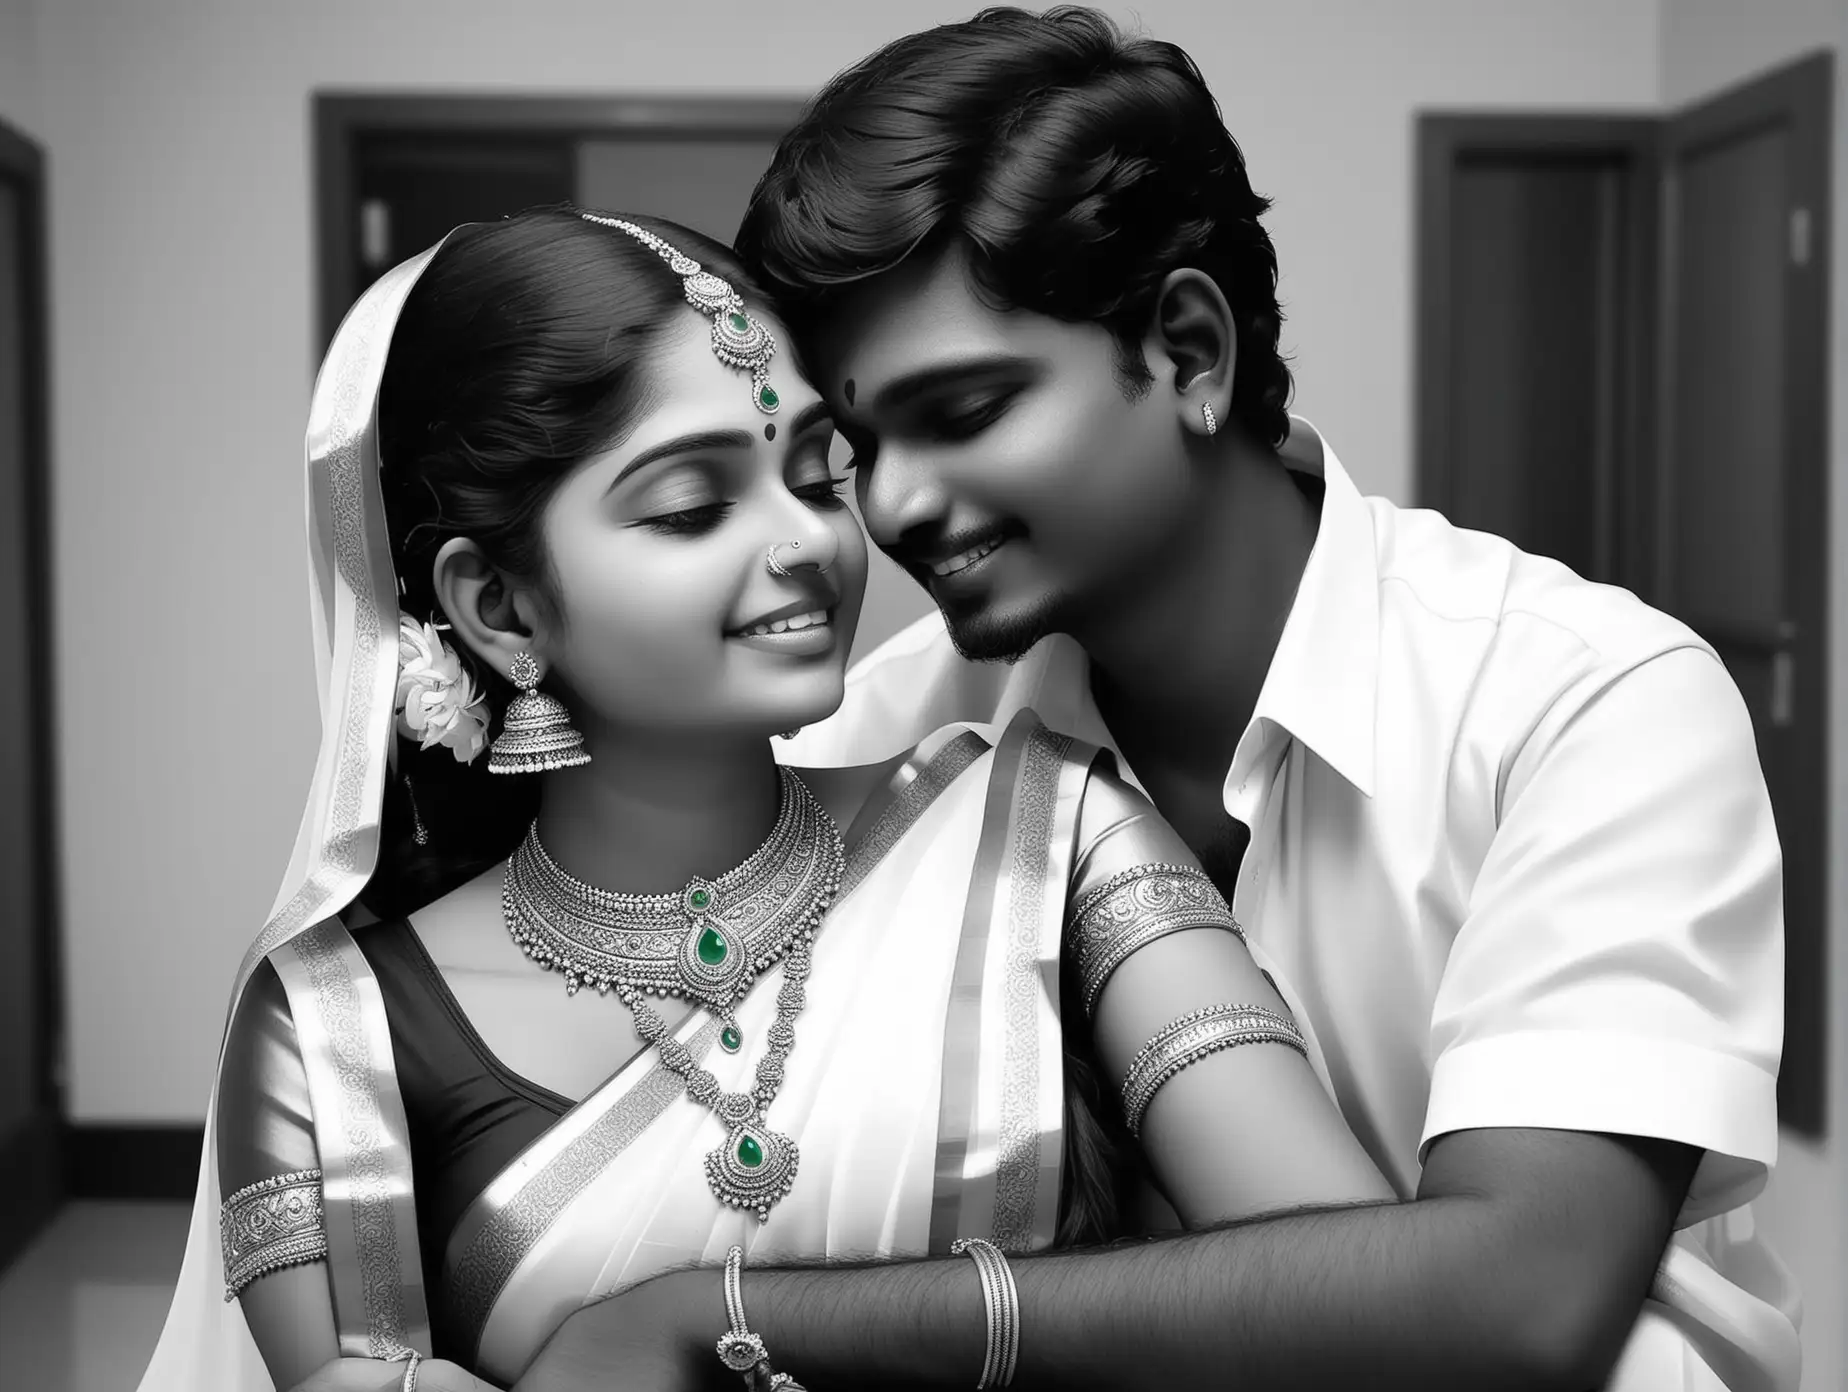 Traditional-Tamil-Couples-in-Wedding-Attire-Celebrating-Rituals